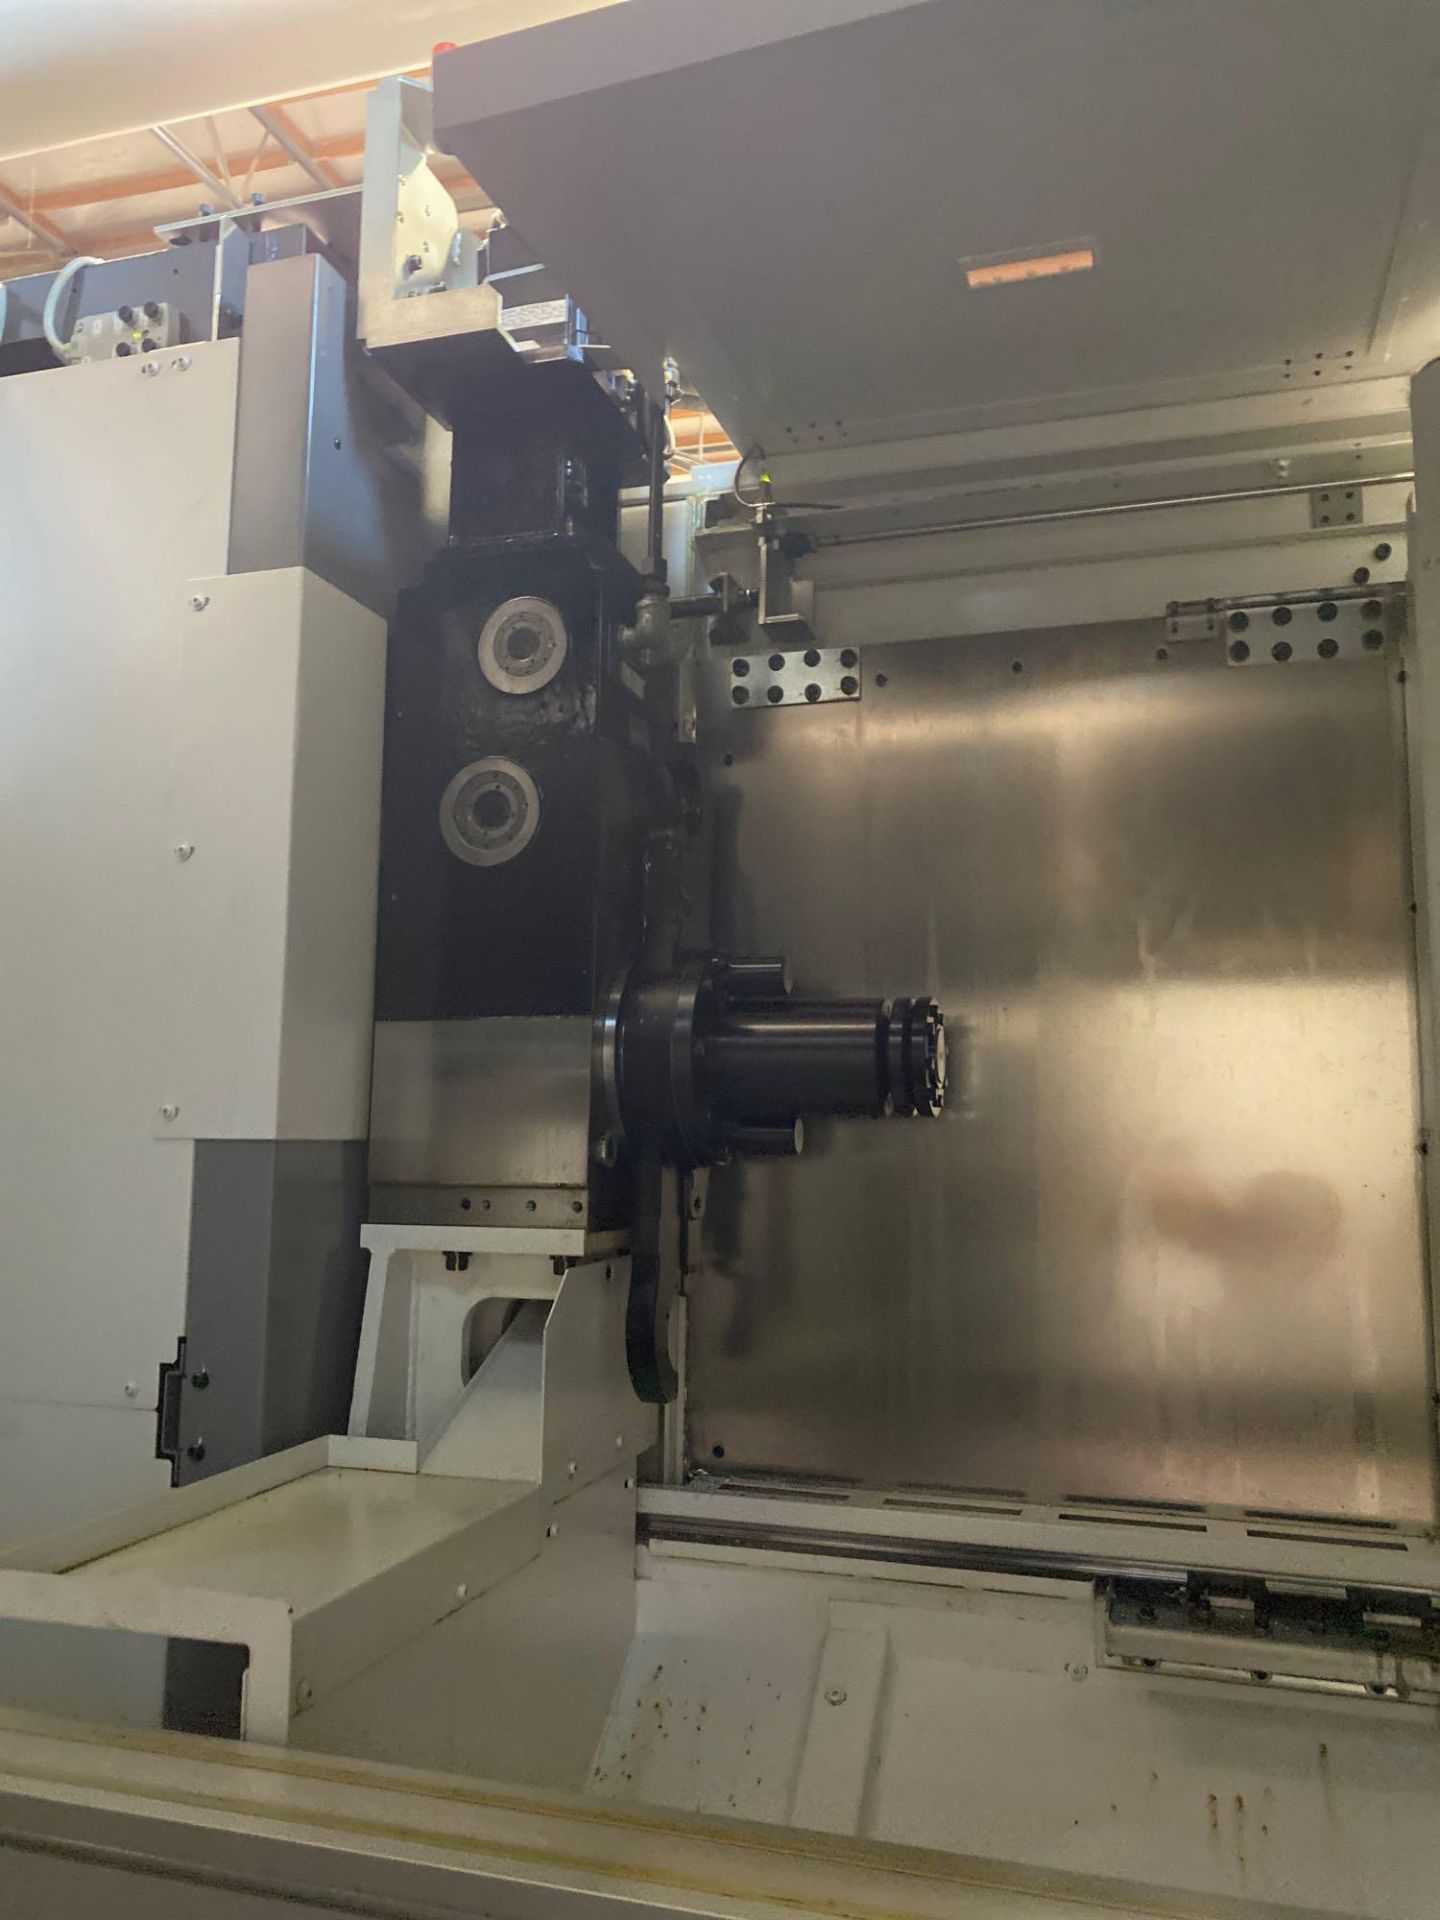 (2) Okuma MB-5000H 4-Axis HMC in F.M.S., OSP-P300MA Ctrl., 30” x 30” x 30” Travels, New 2018 - Image 27 of 32